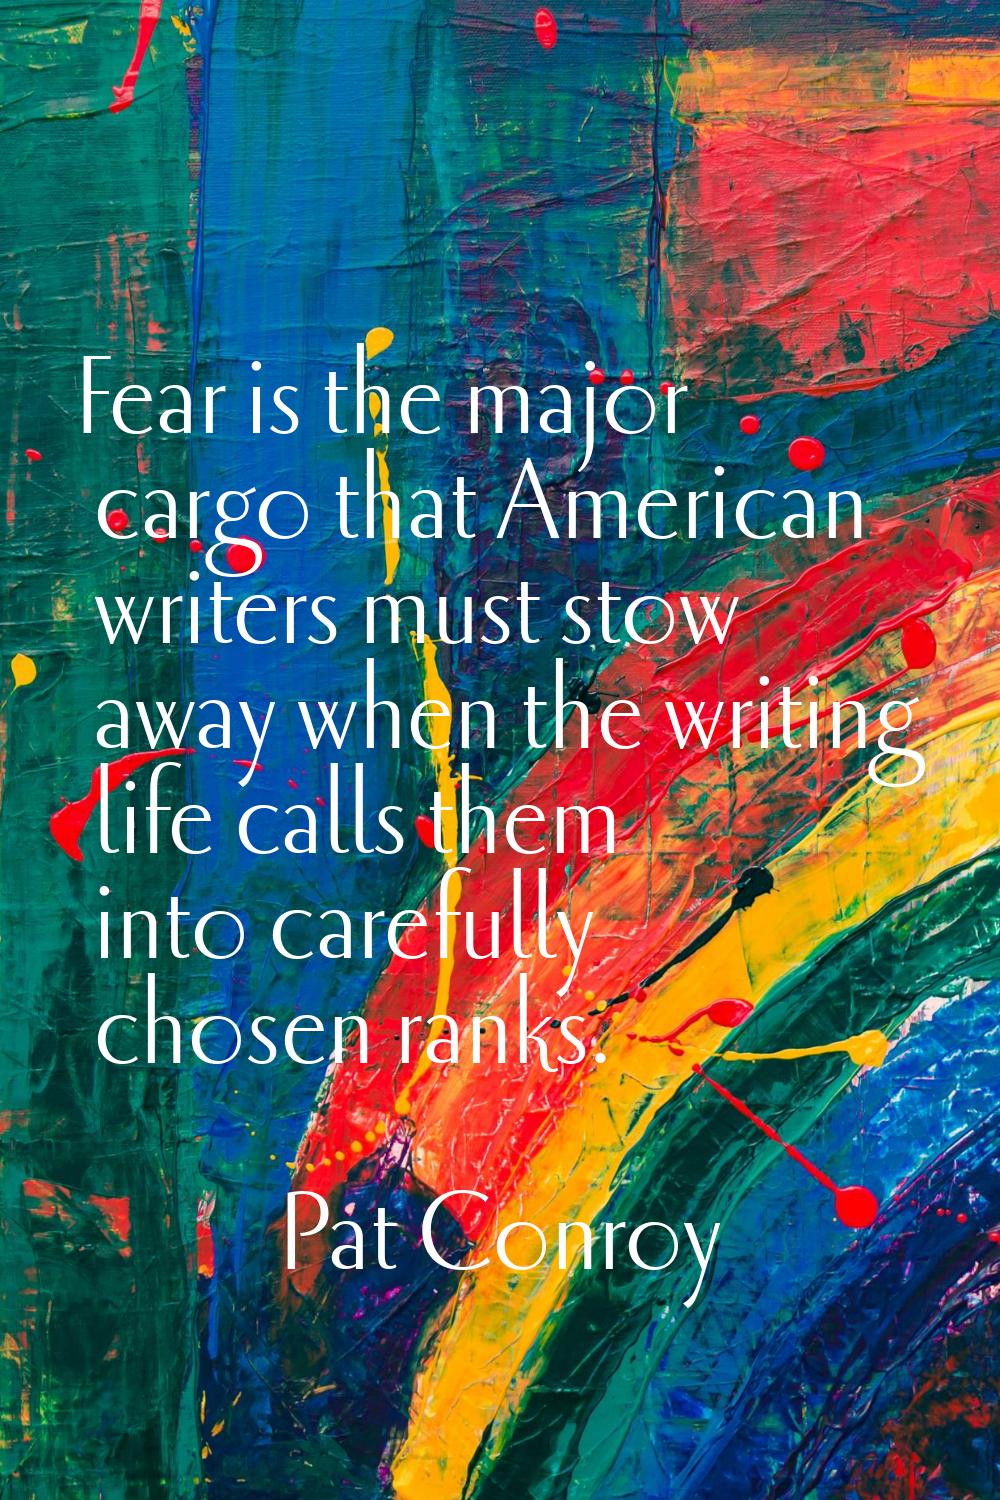 Fear is the major cargo that American writers must stow away when the writing life calls them into 